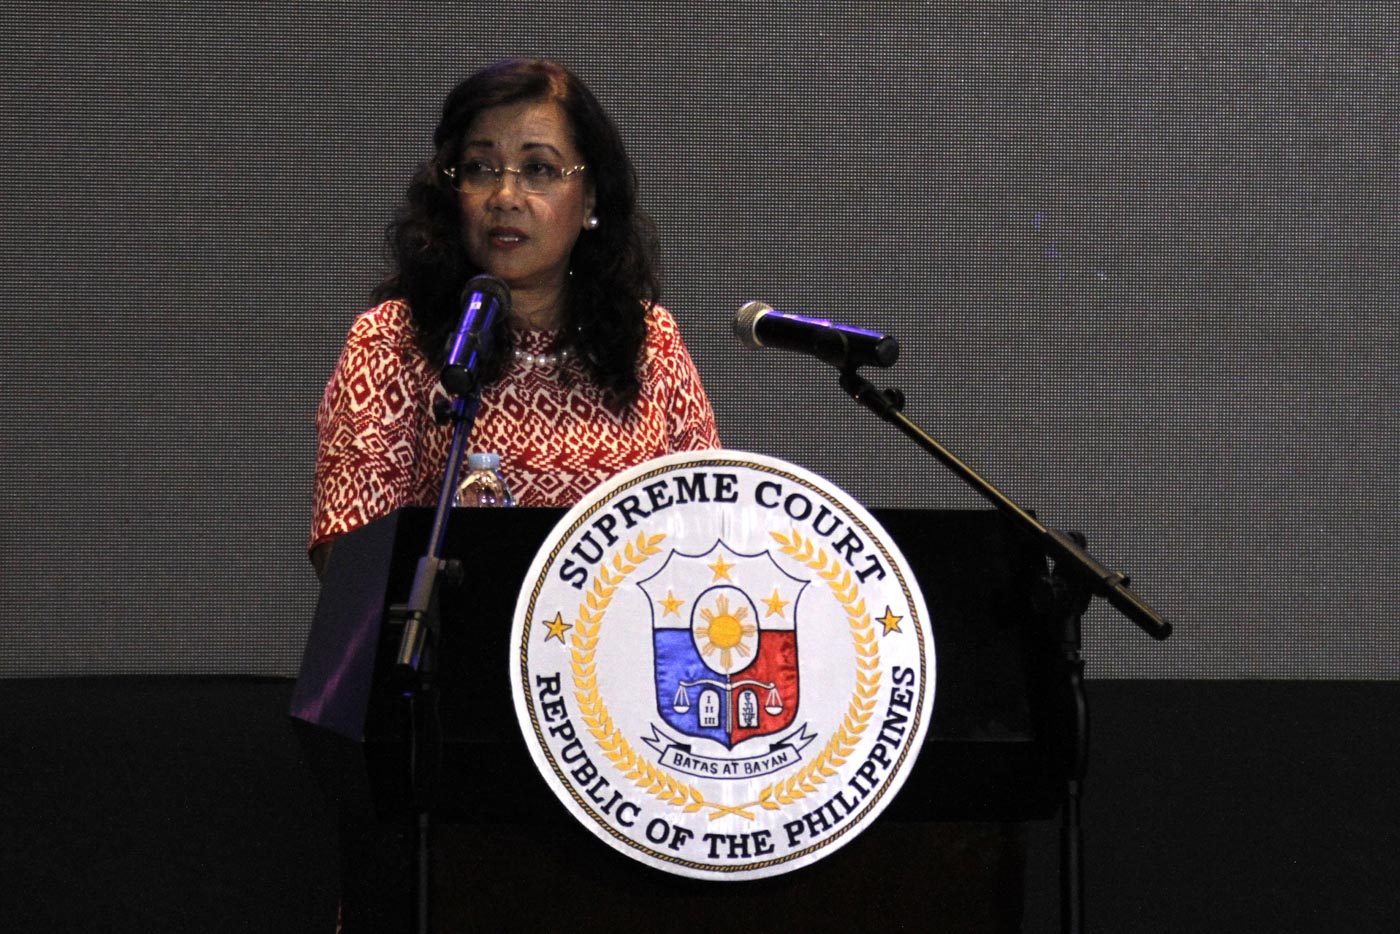 ‘Do not be afraid to be minority’: Chief Justice Sereno, 5 years on